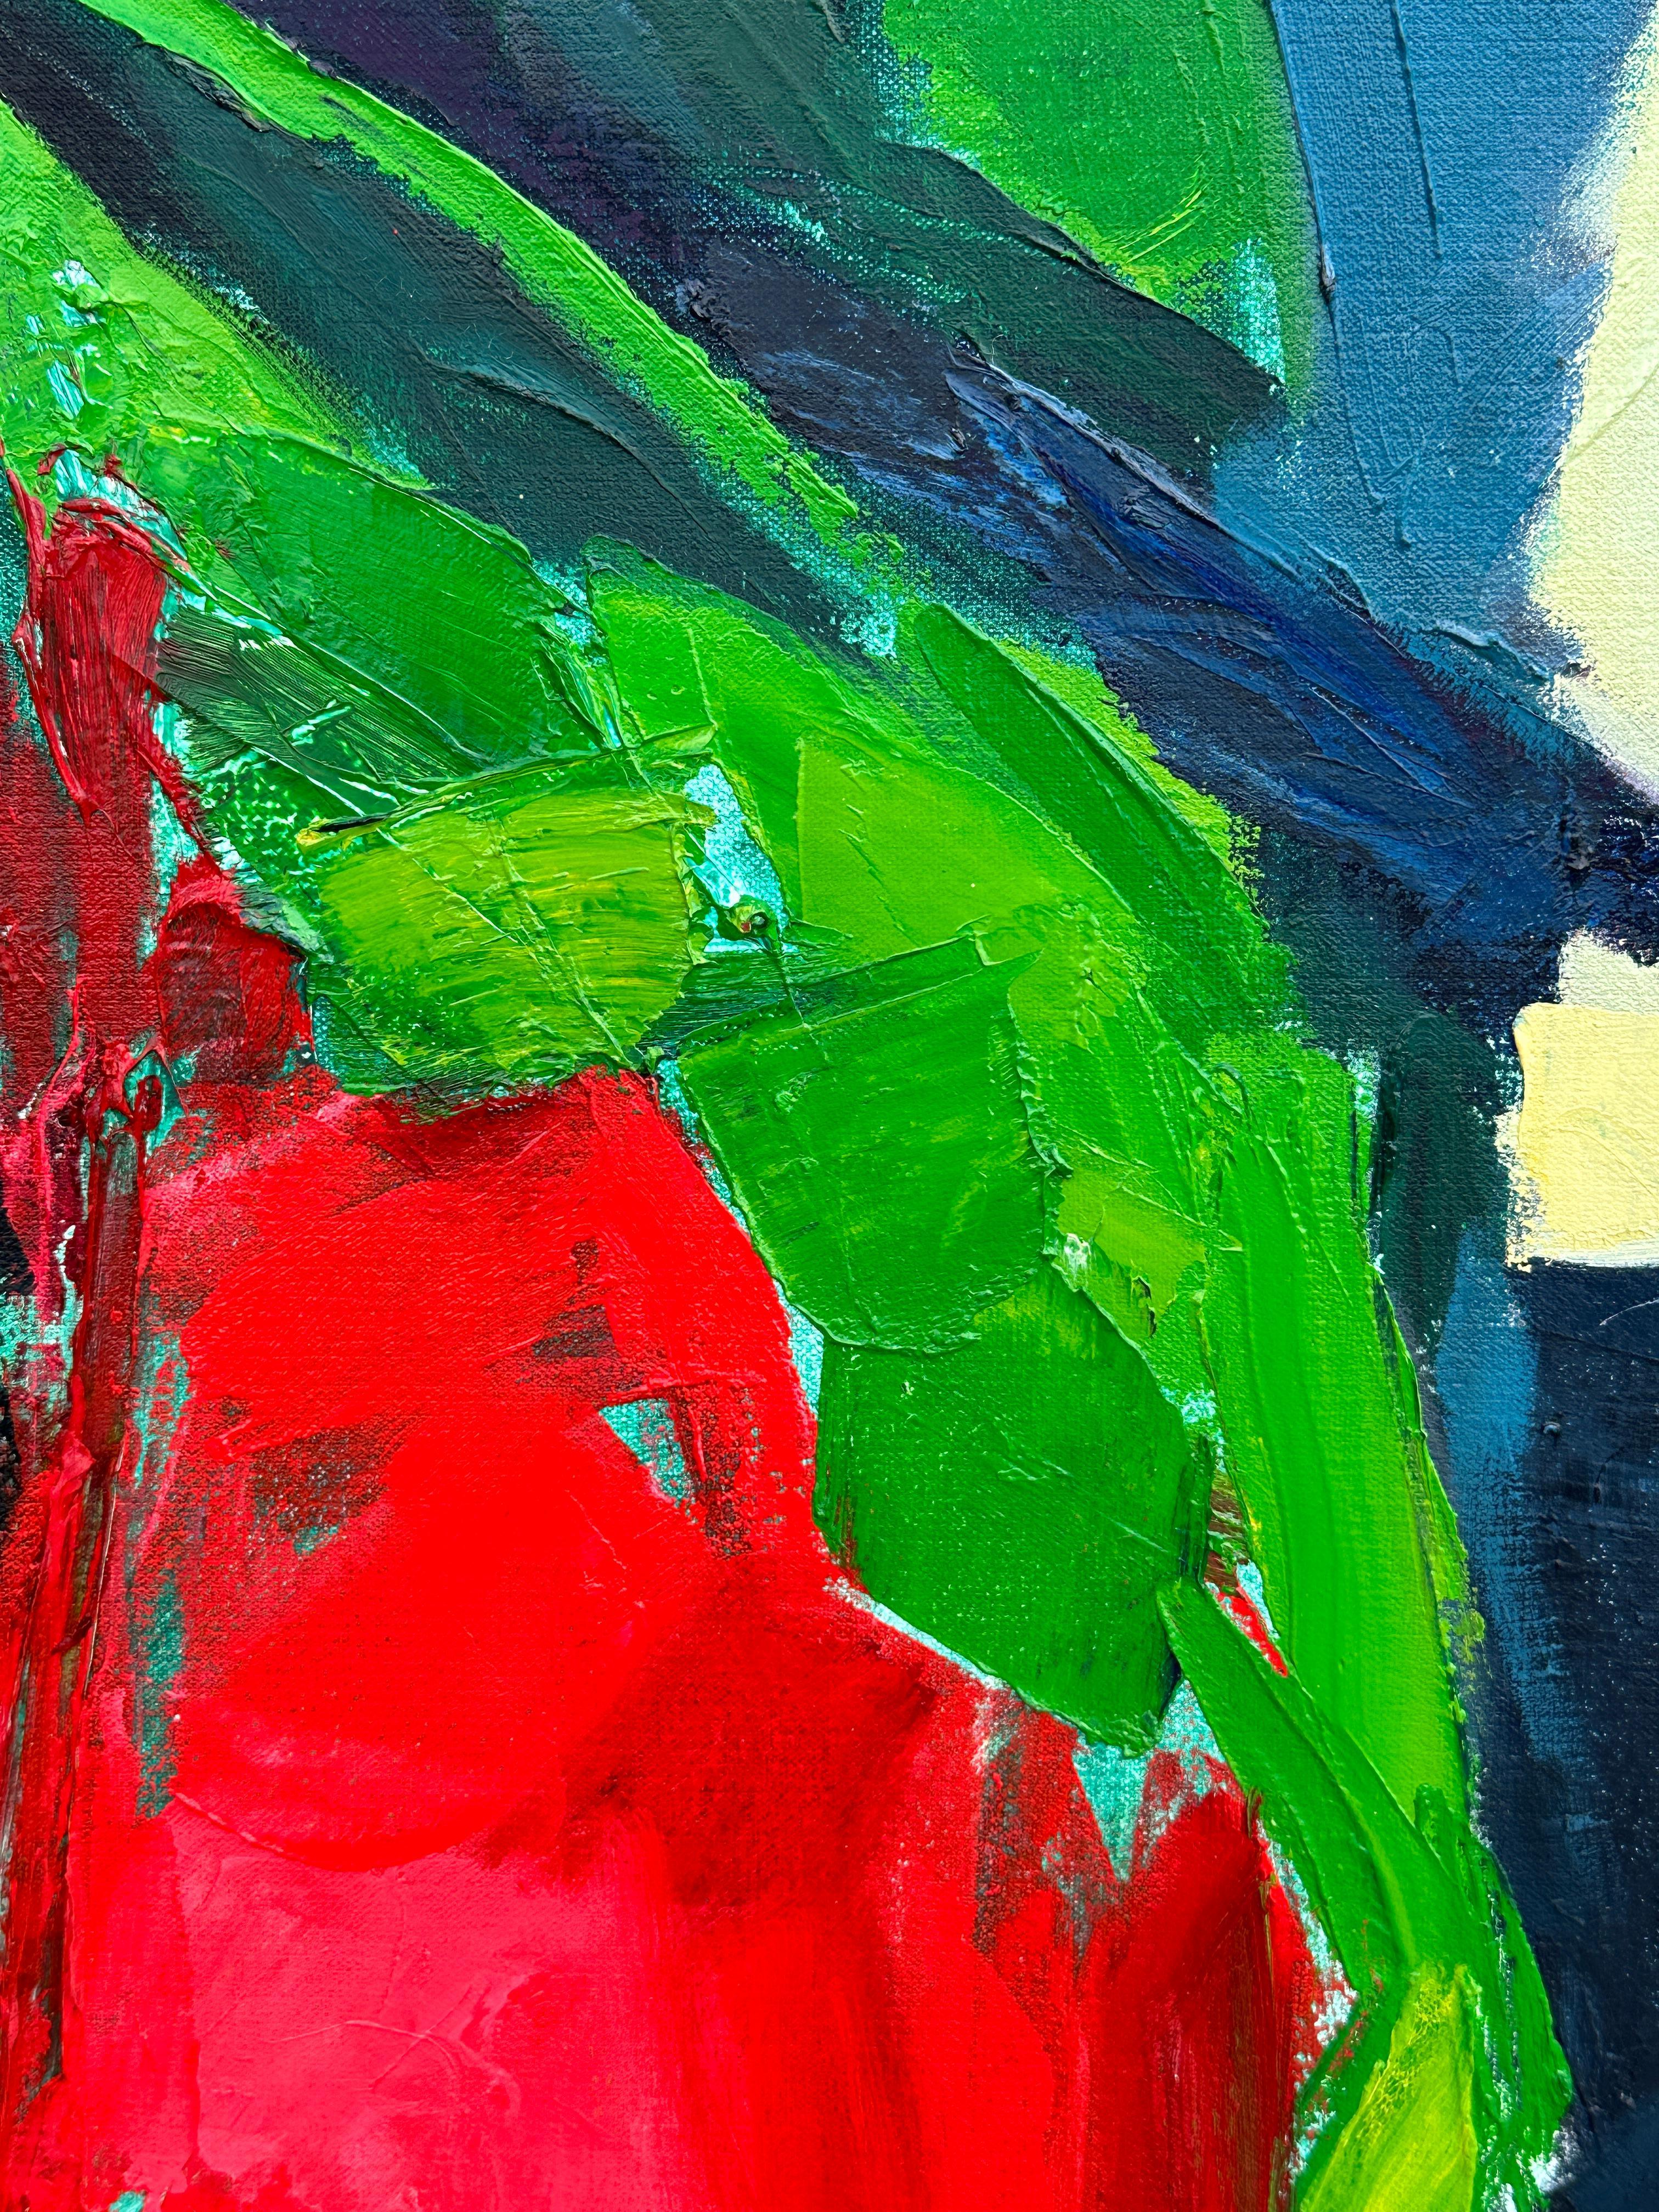 Colorful Light Green and Red Abstract - Acrylic on Canvas by Eric K. Fiazi - Abstract Expressionist Painting by Eric Fiazi